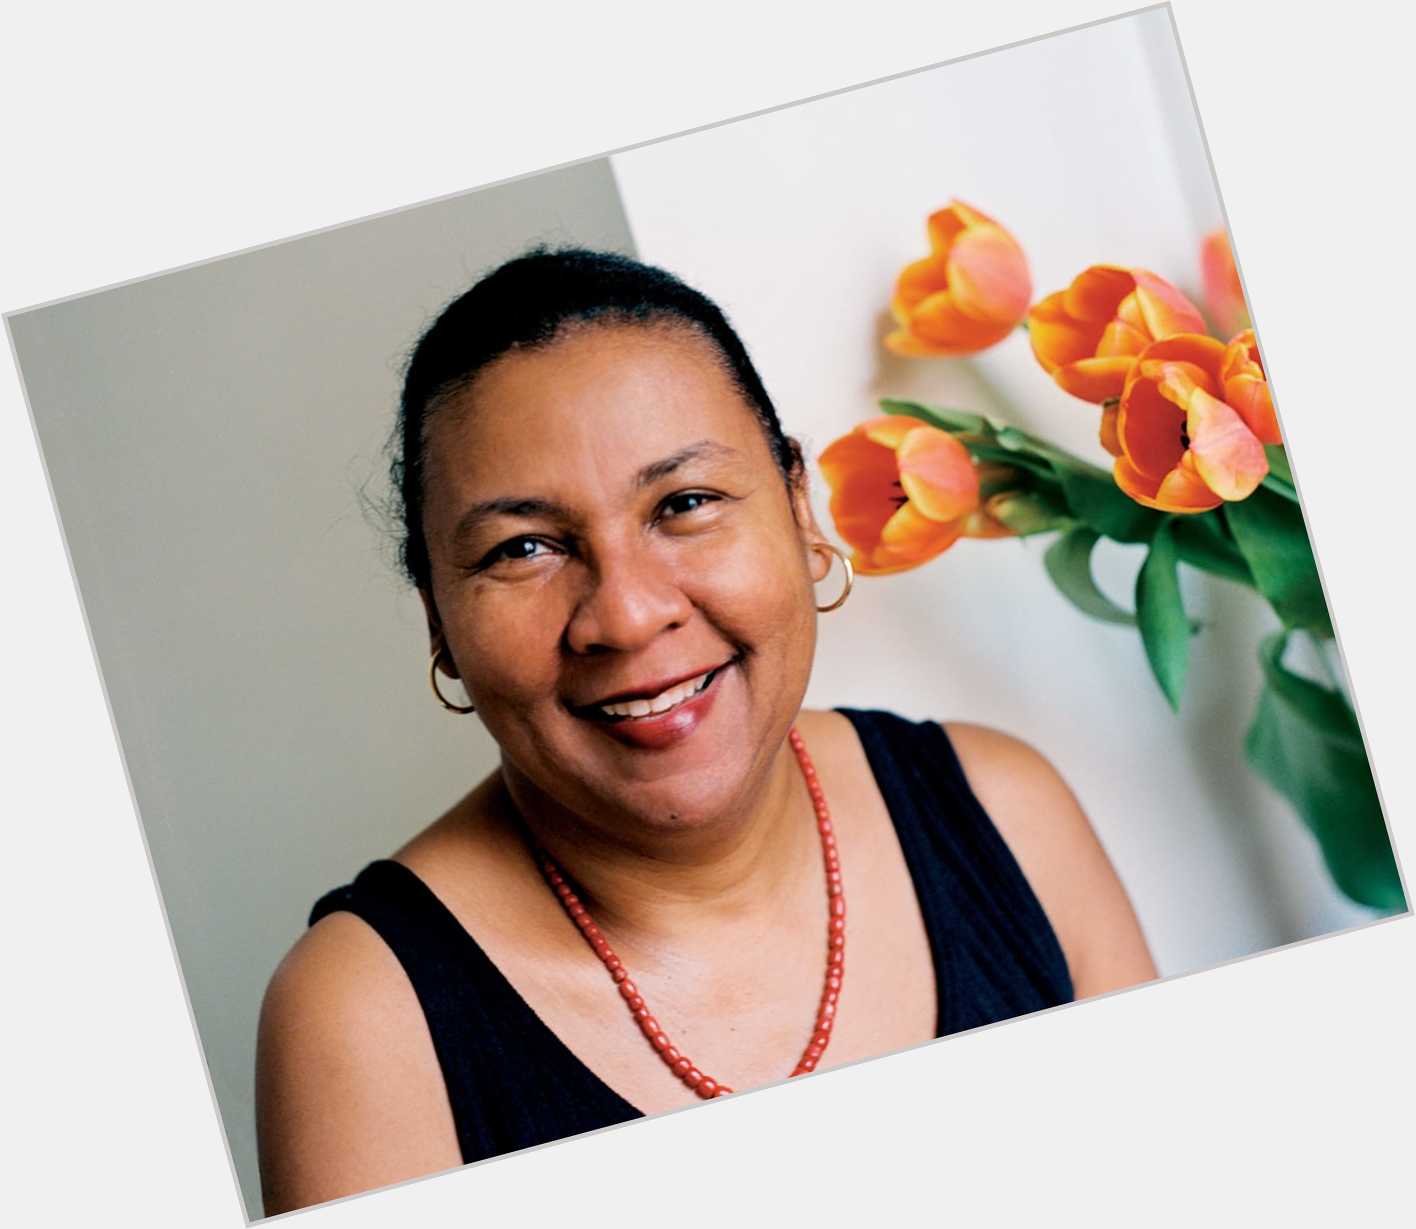 \"Live simply so that others may simply live\" - bell hooks

Happy birthday  